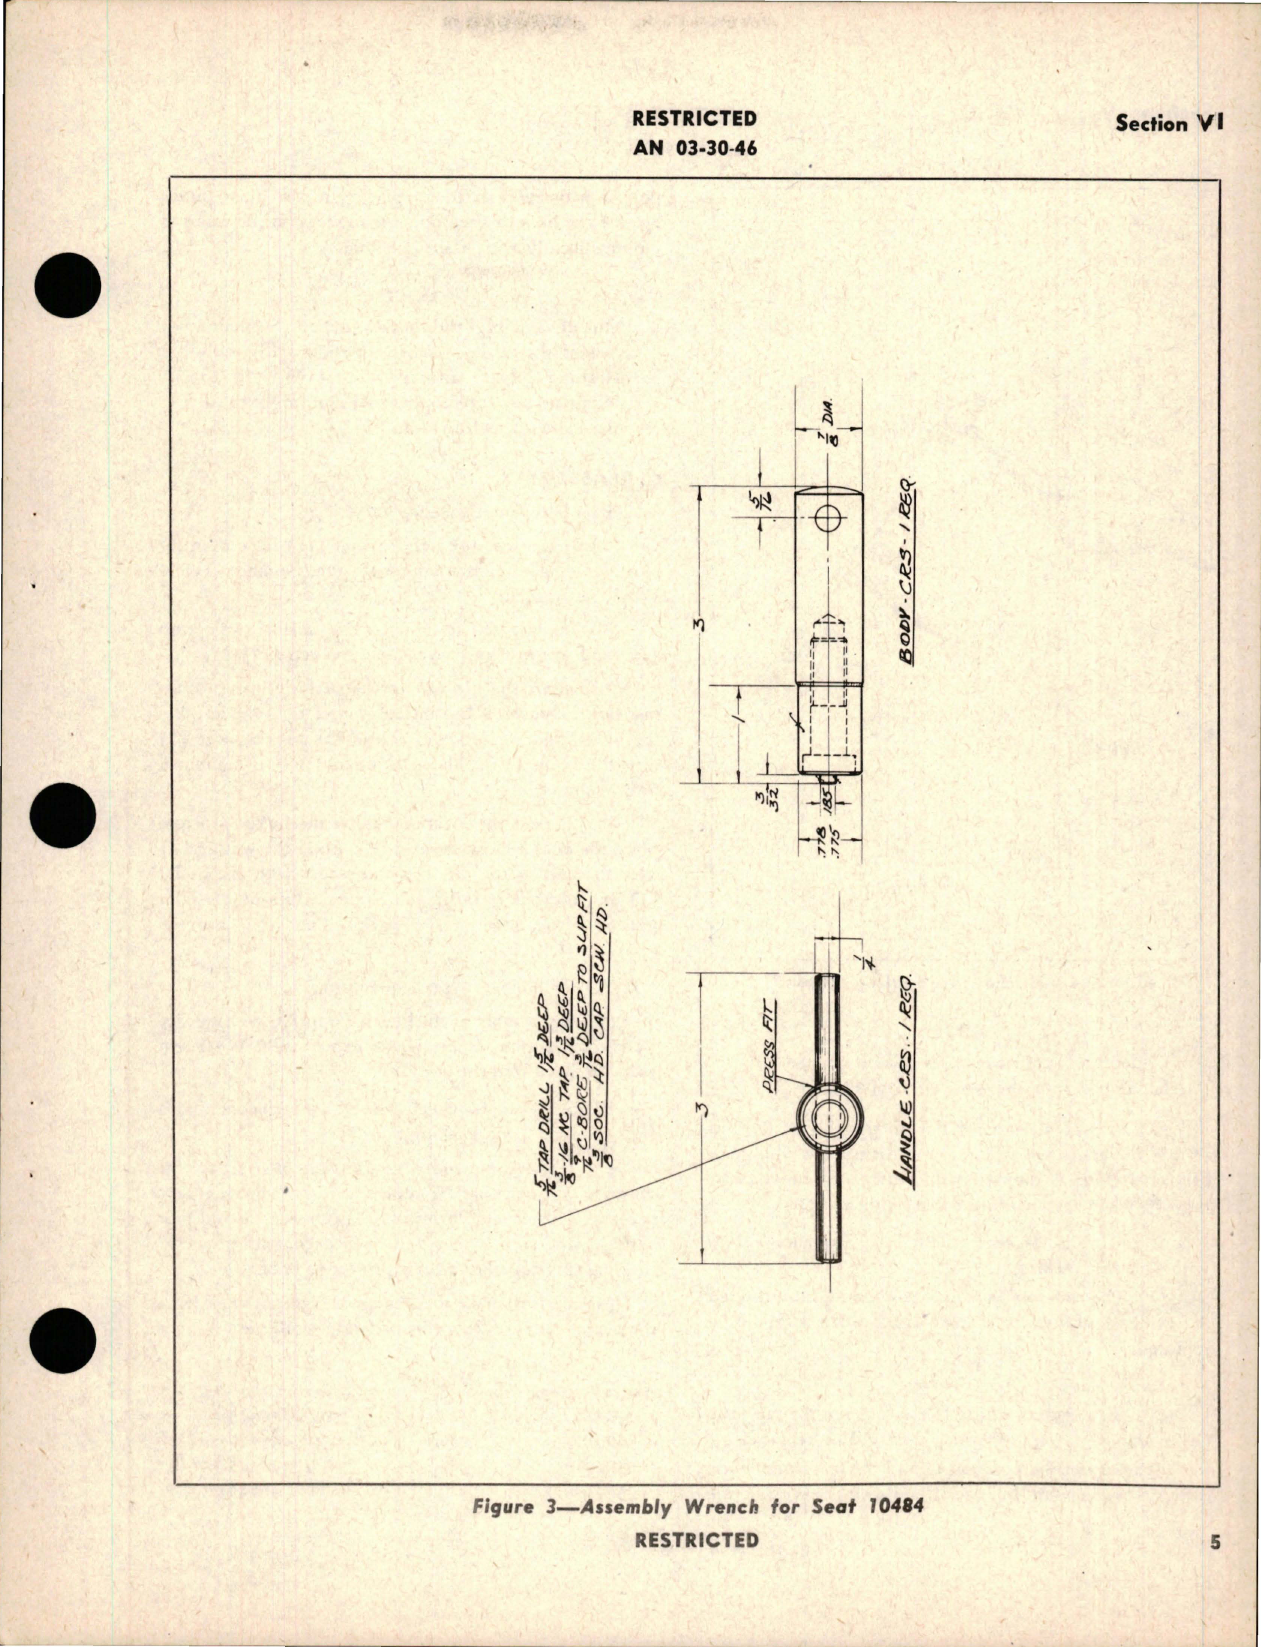 Sample page 9 from AirCorps Library document: Instructions with Parts Catalog for Hydraulic Sequence Valves - 403196 Series, 402004 Series, and 401275-4